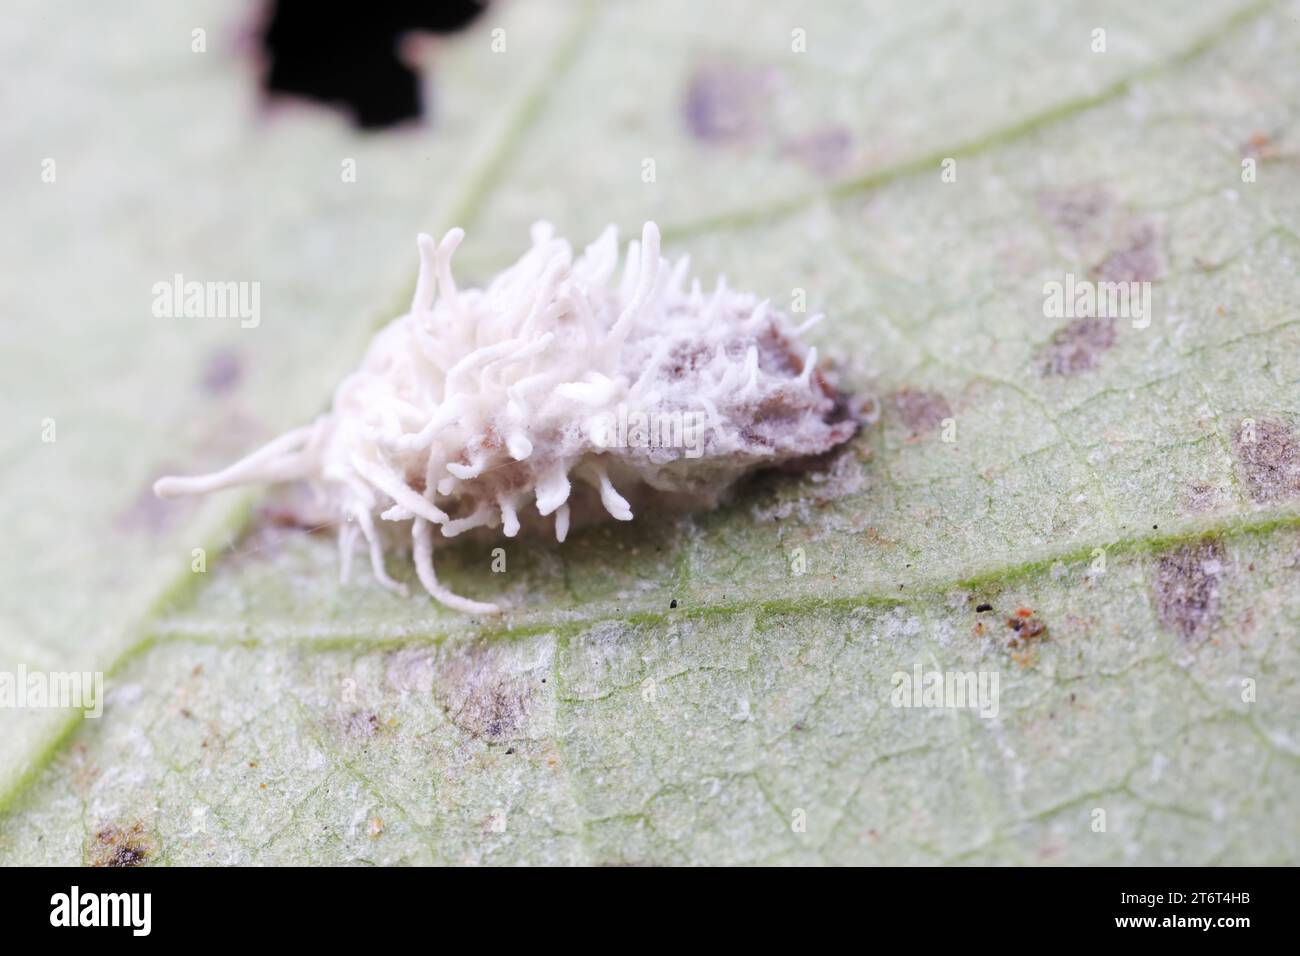 Insects parasitized by fungi Stock Photo